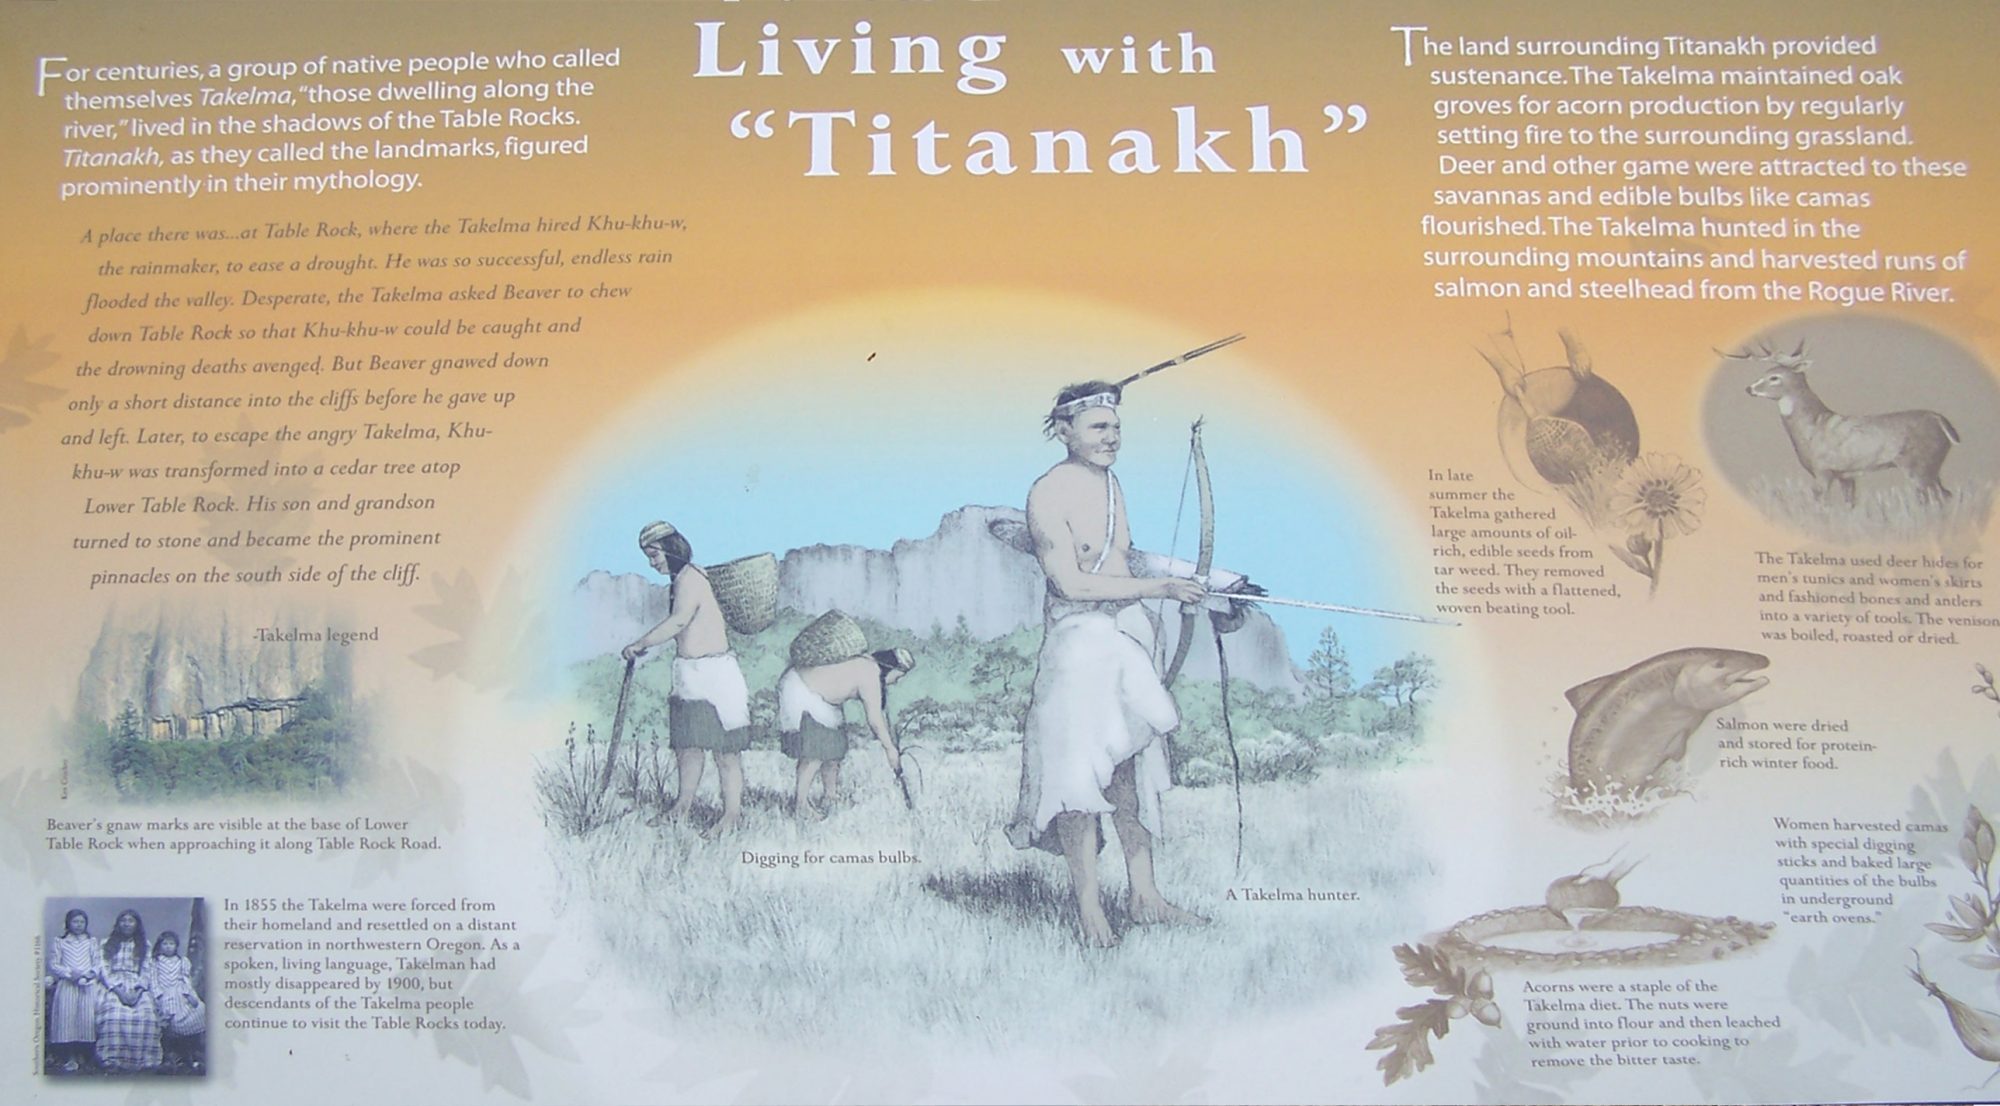 Living-with-Totanakh